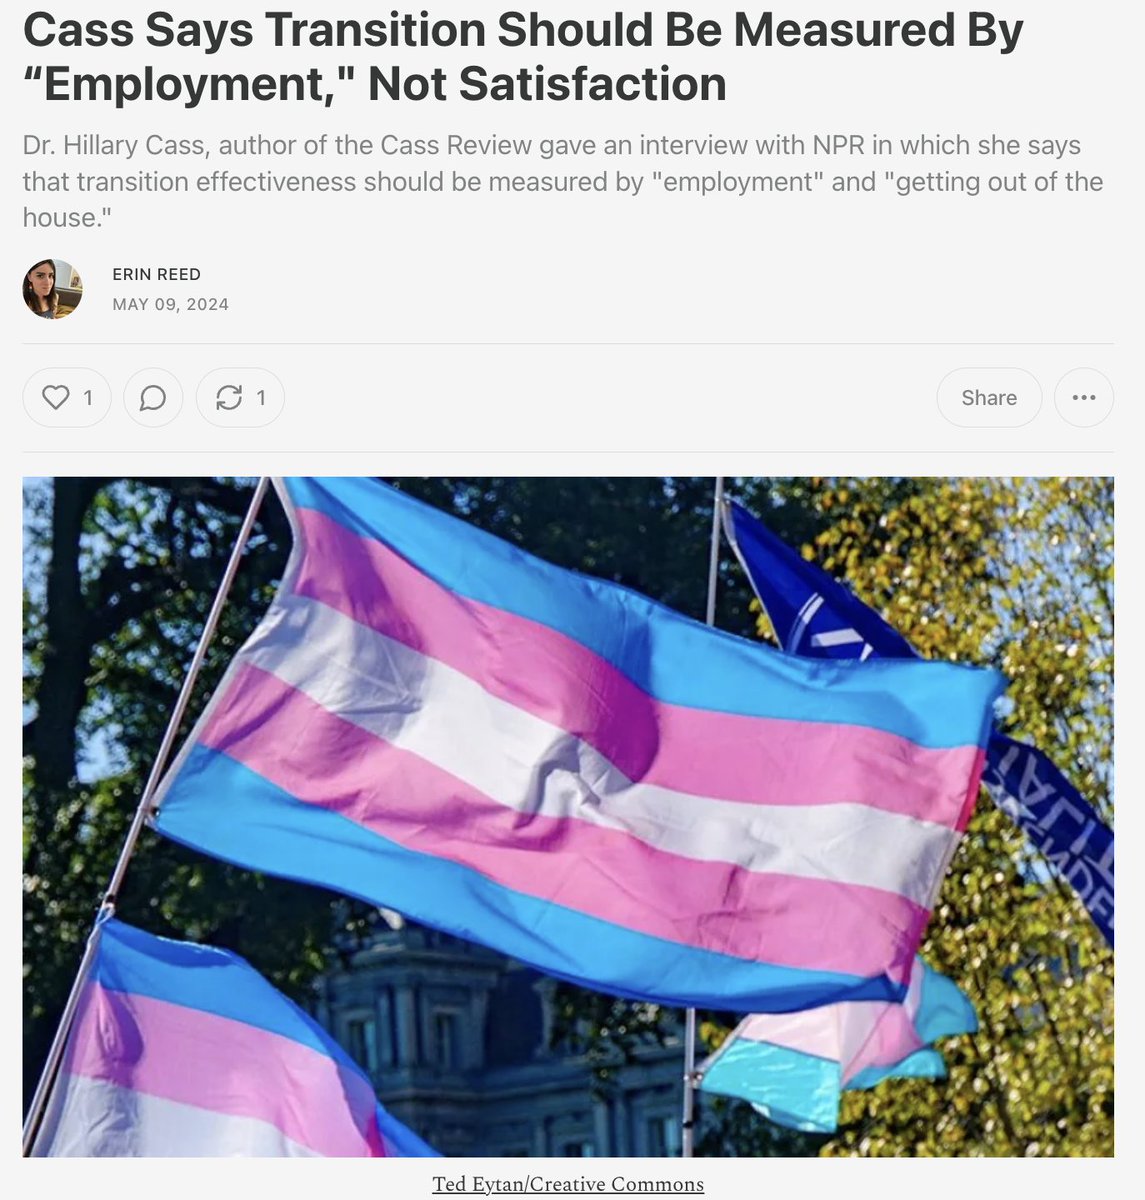 1. In an interview yesterday, Dr. Cass stated that trans care should be based on factors like 'employment' and 'getting out of the house,' rather than satisfaction. In doing so, she revived a very old attack on trans people from the 1970s. Subscribe to support my journalism.